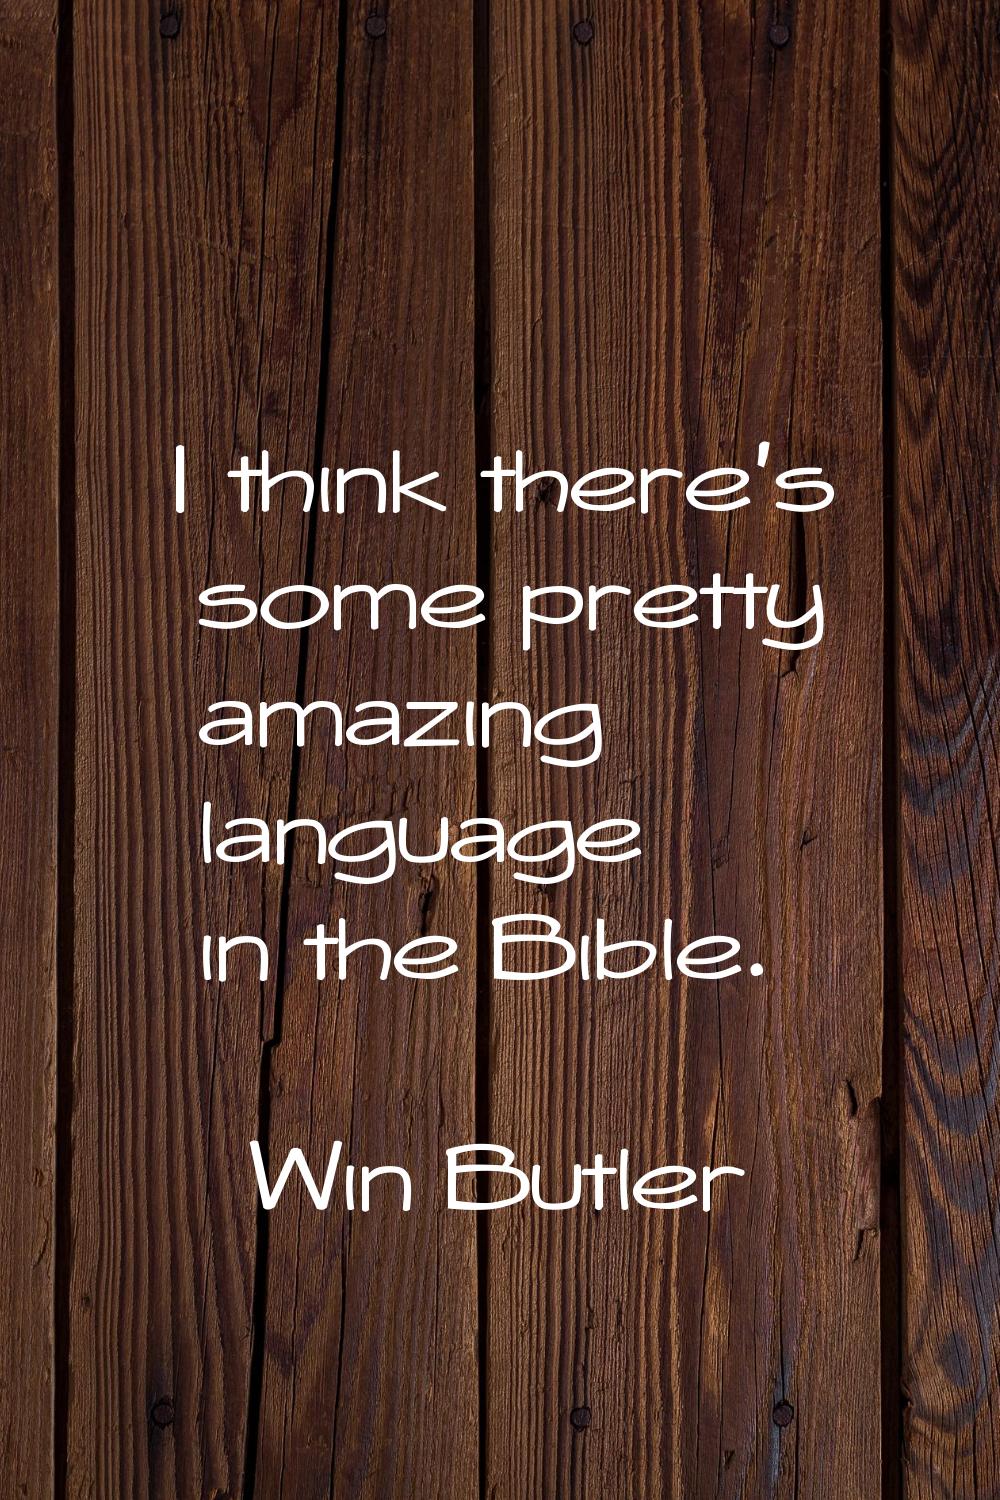 I think there's some pretty amazing language in the Bible.